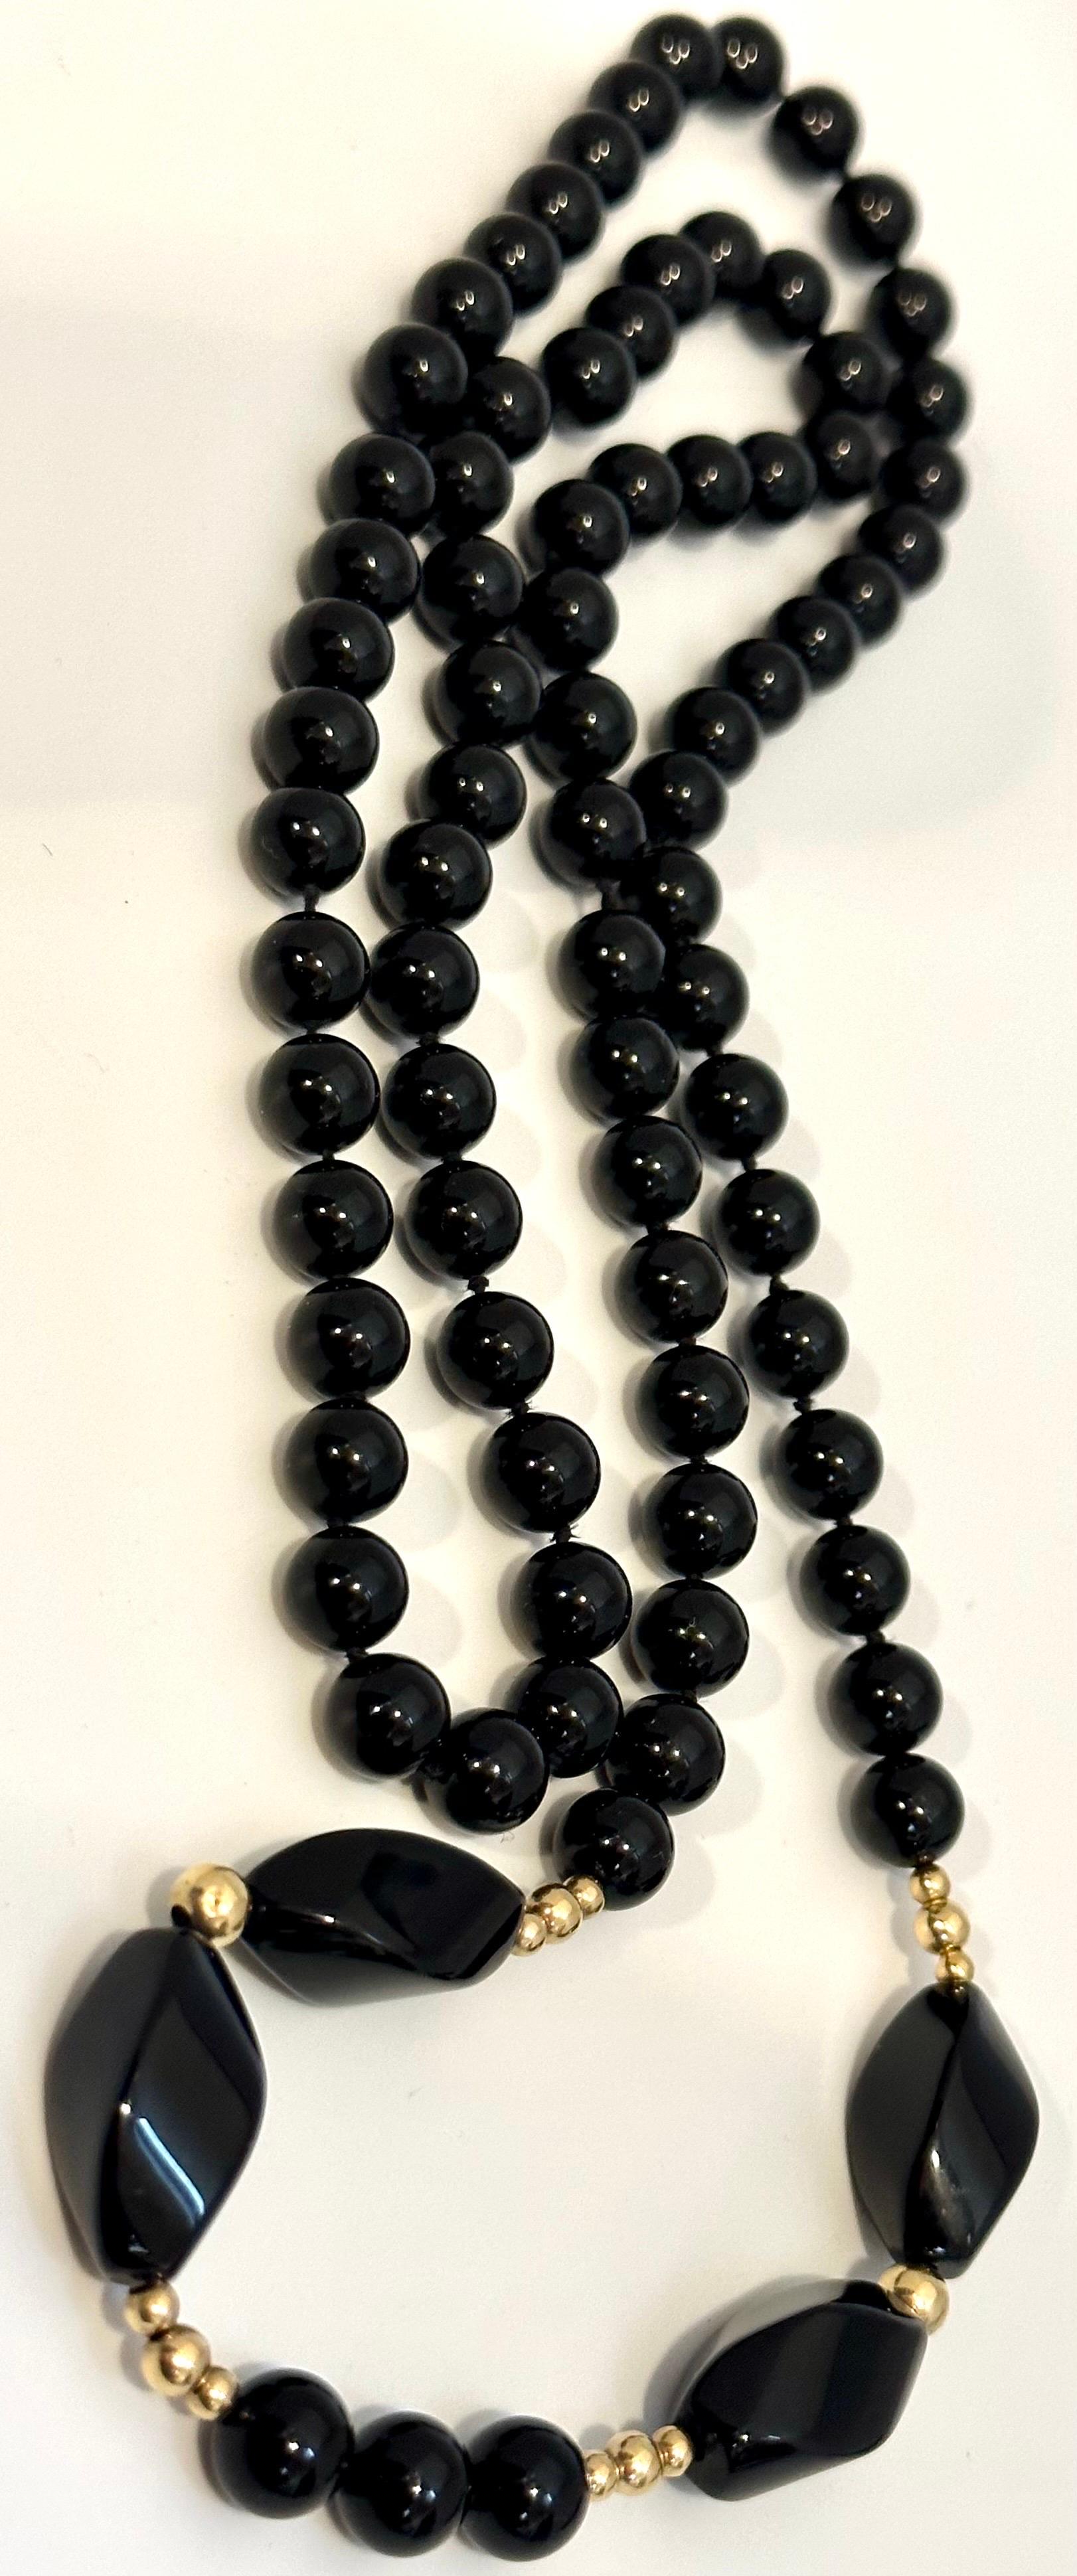 Round Cut Round 8 MM Bead Black Onyx & 14 Karat Gold Bead Necklace 32 Inch Long For Sale